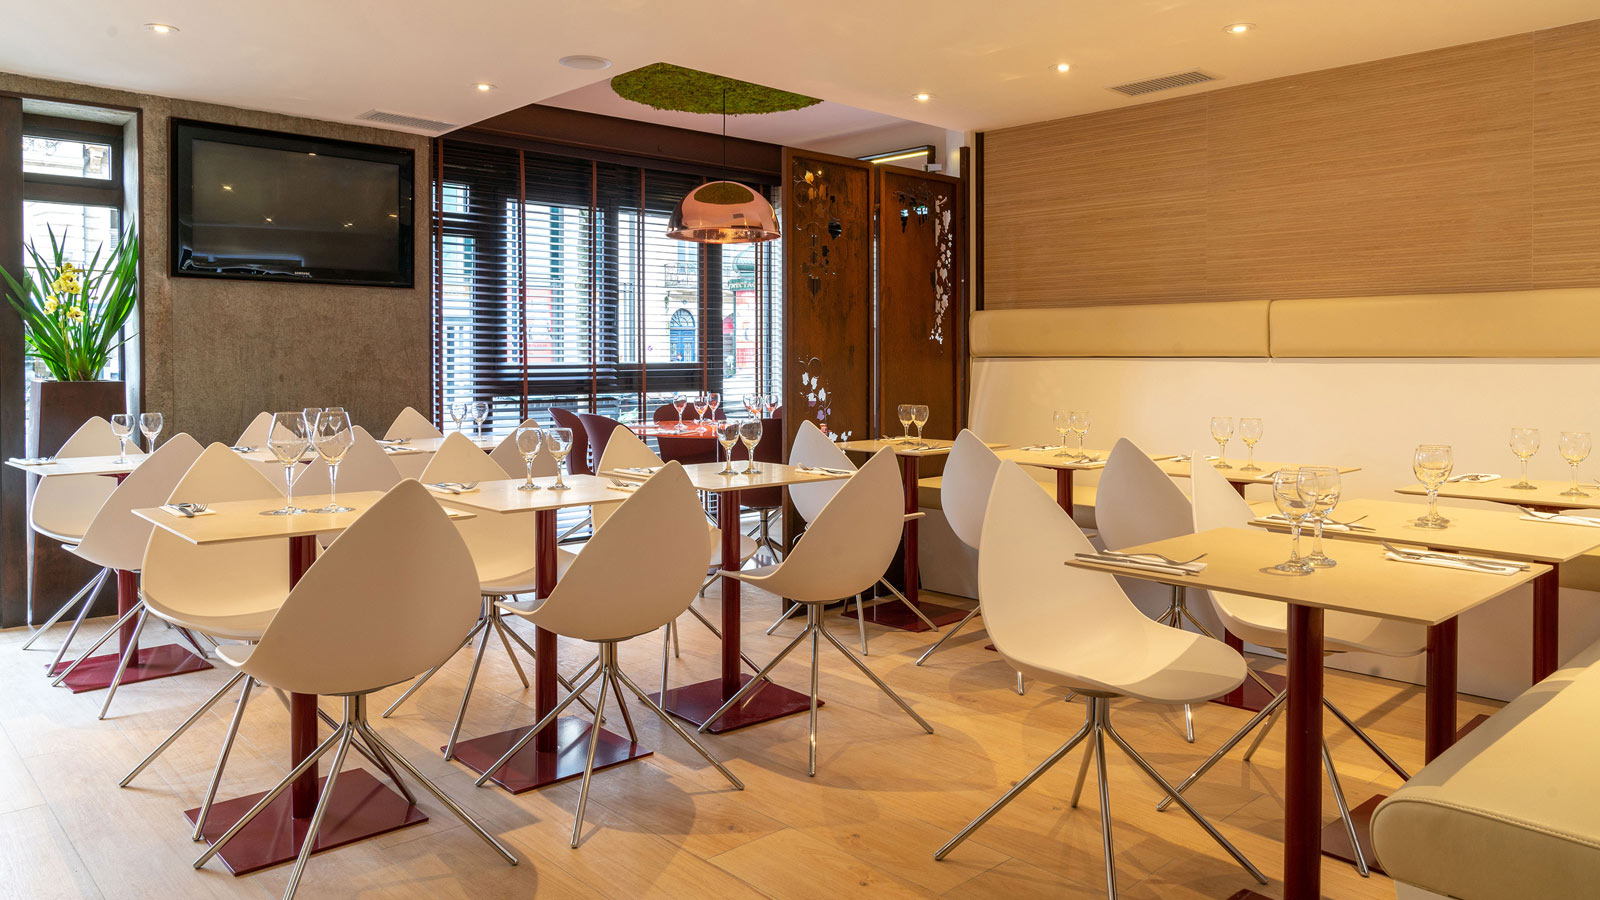 PORCELANOSA Group Projects: The Le Grand Café restaurant in Bordeaux extends its menu through materials from the PORCELANOSA Grupo